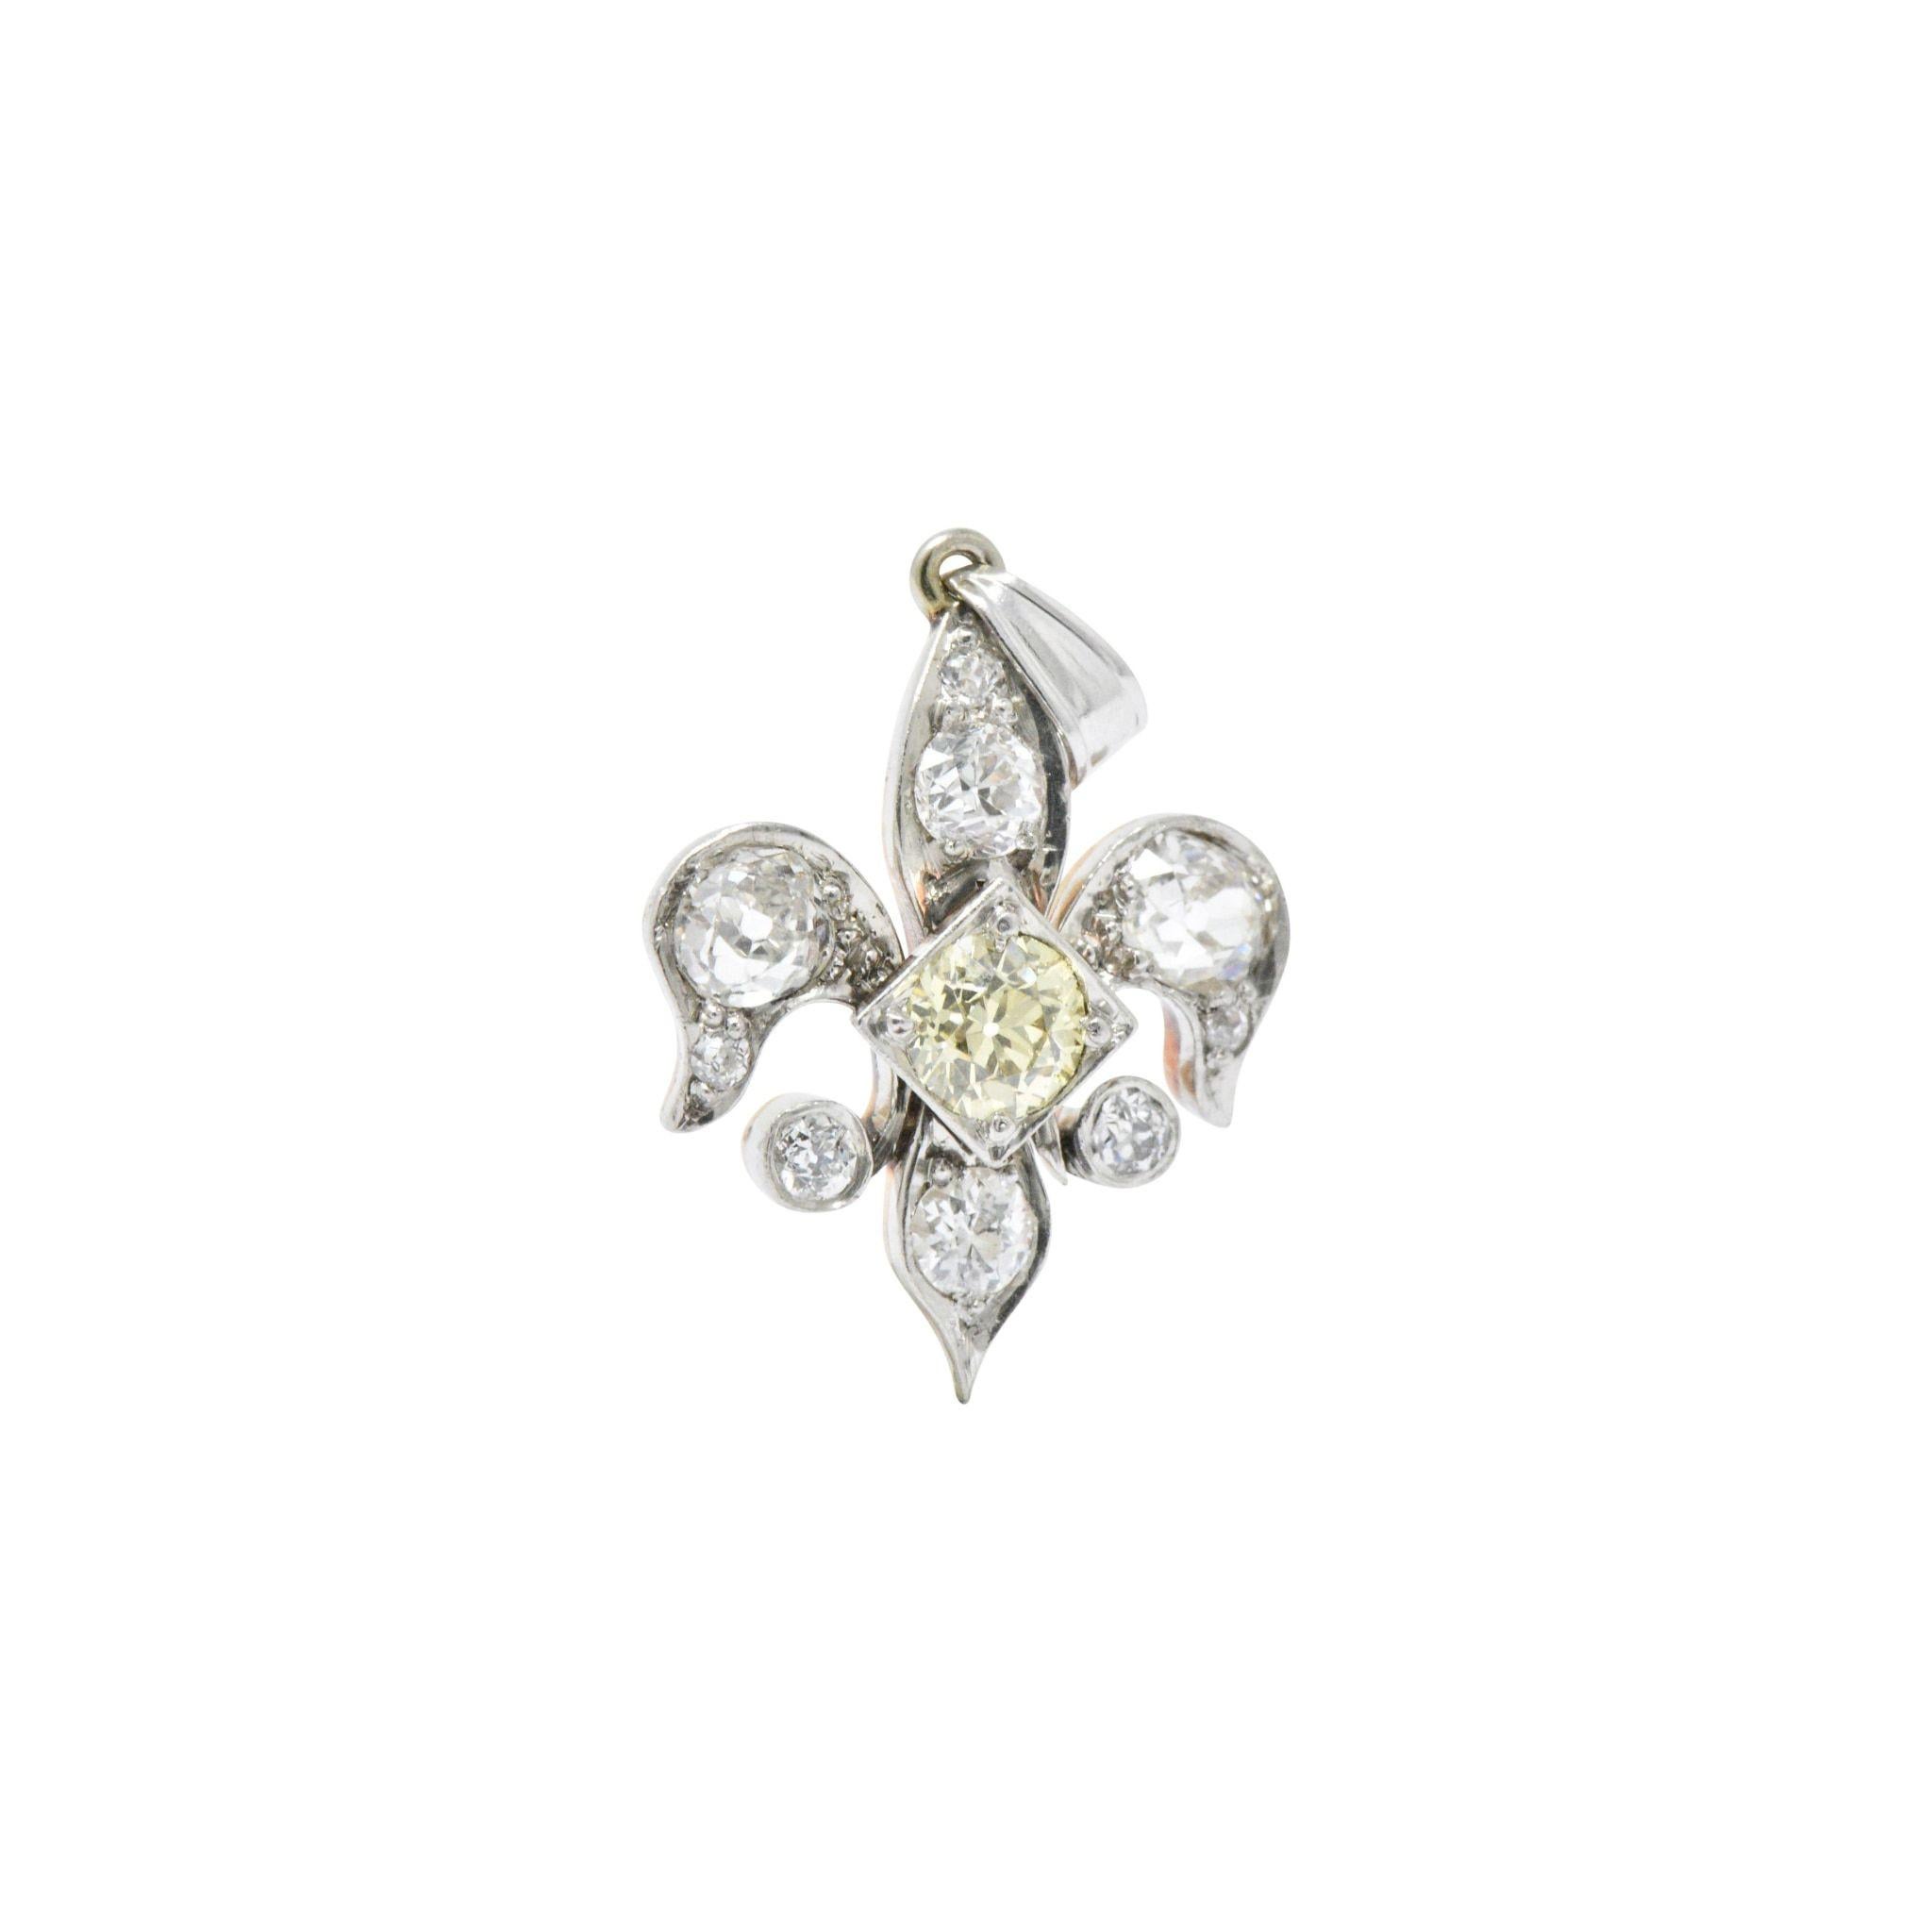 Designed as a Fleur-De-Lis, centering a natural fancy yellow old European cut diamond weighing approximately 0.50 carats total, bright cheerful yellow and VS clarity
Set throughout with old European and mine cut diamonds, approximately 0.75 carats